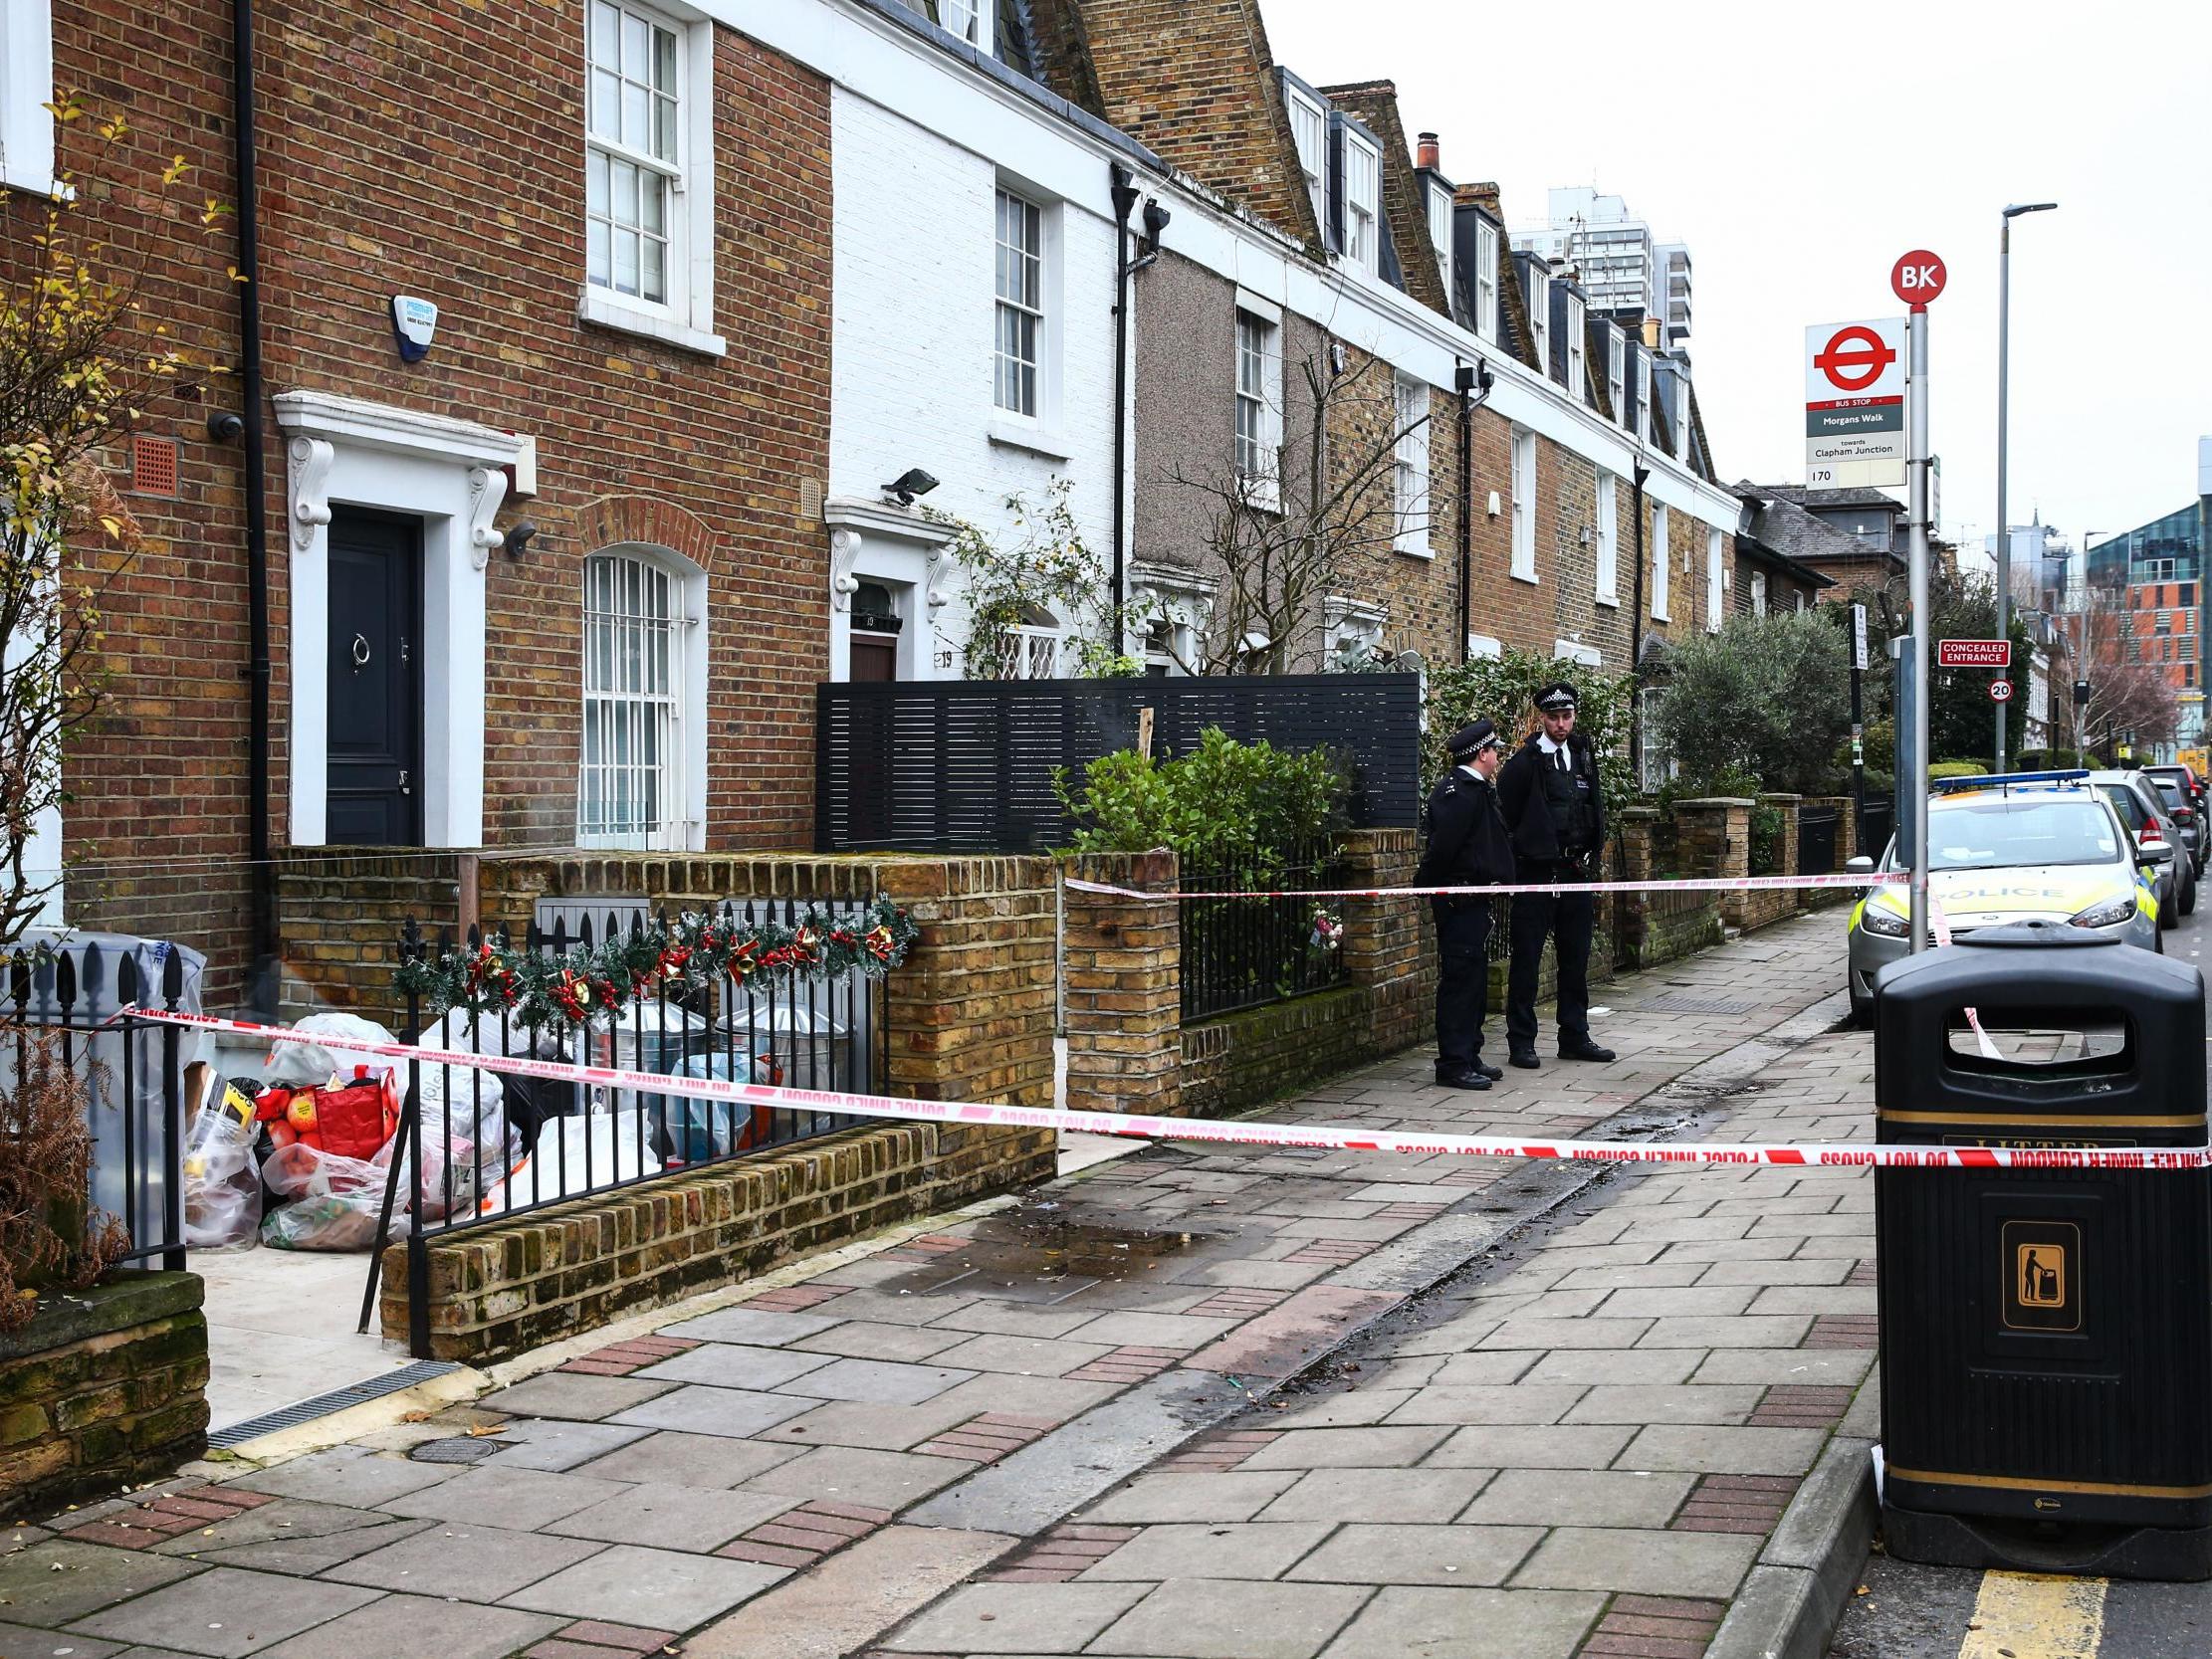 Flamur Beqiri was shot dead near his house in southwest London in what is thought to have been a 'targeted attack'